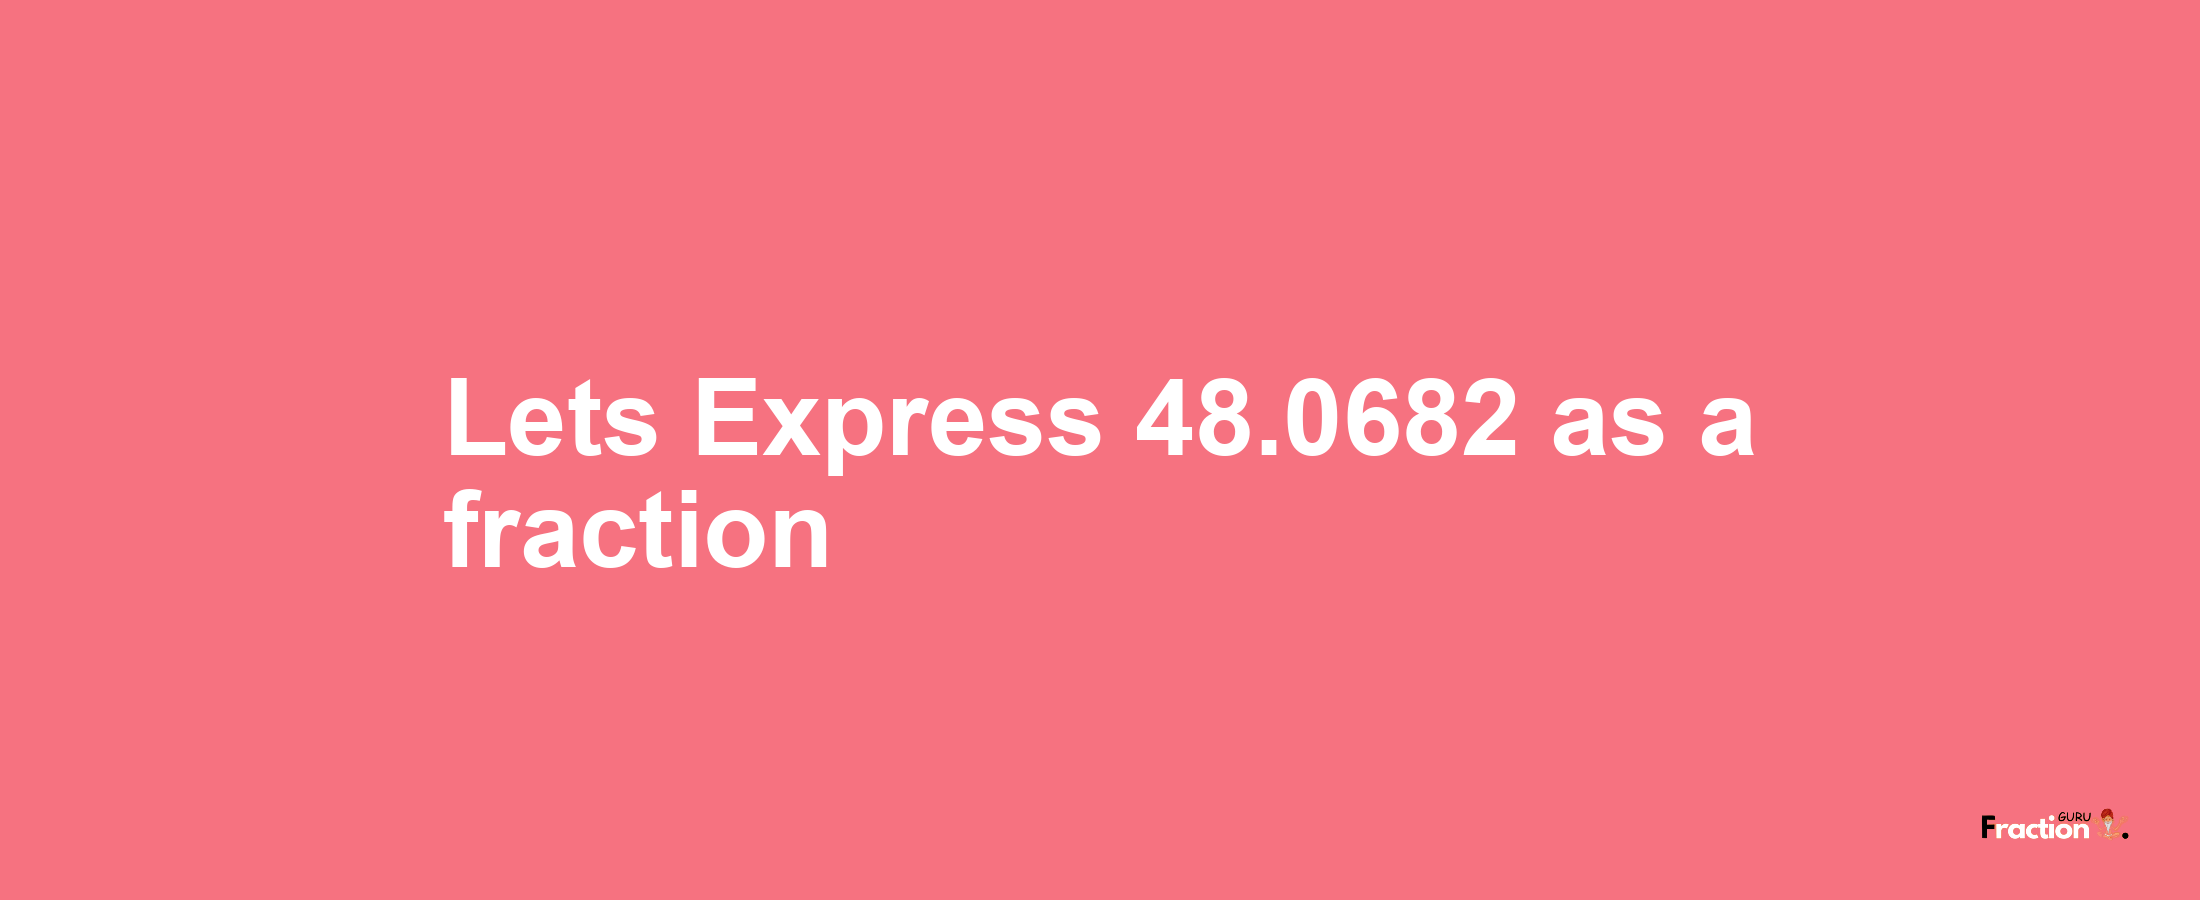 Lets Express 48.0682 as afraction